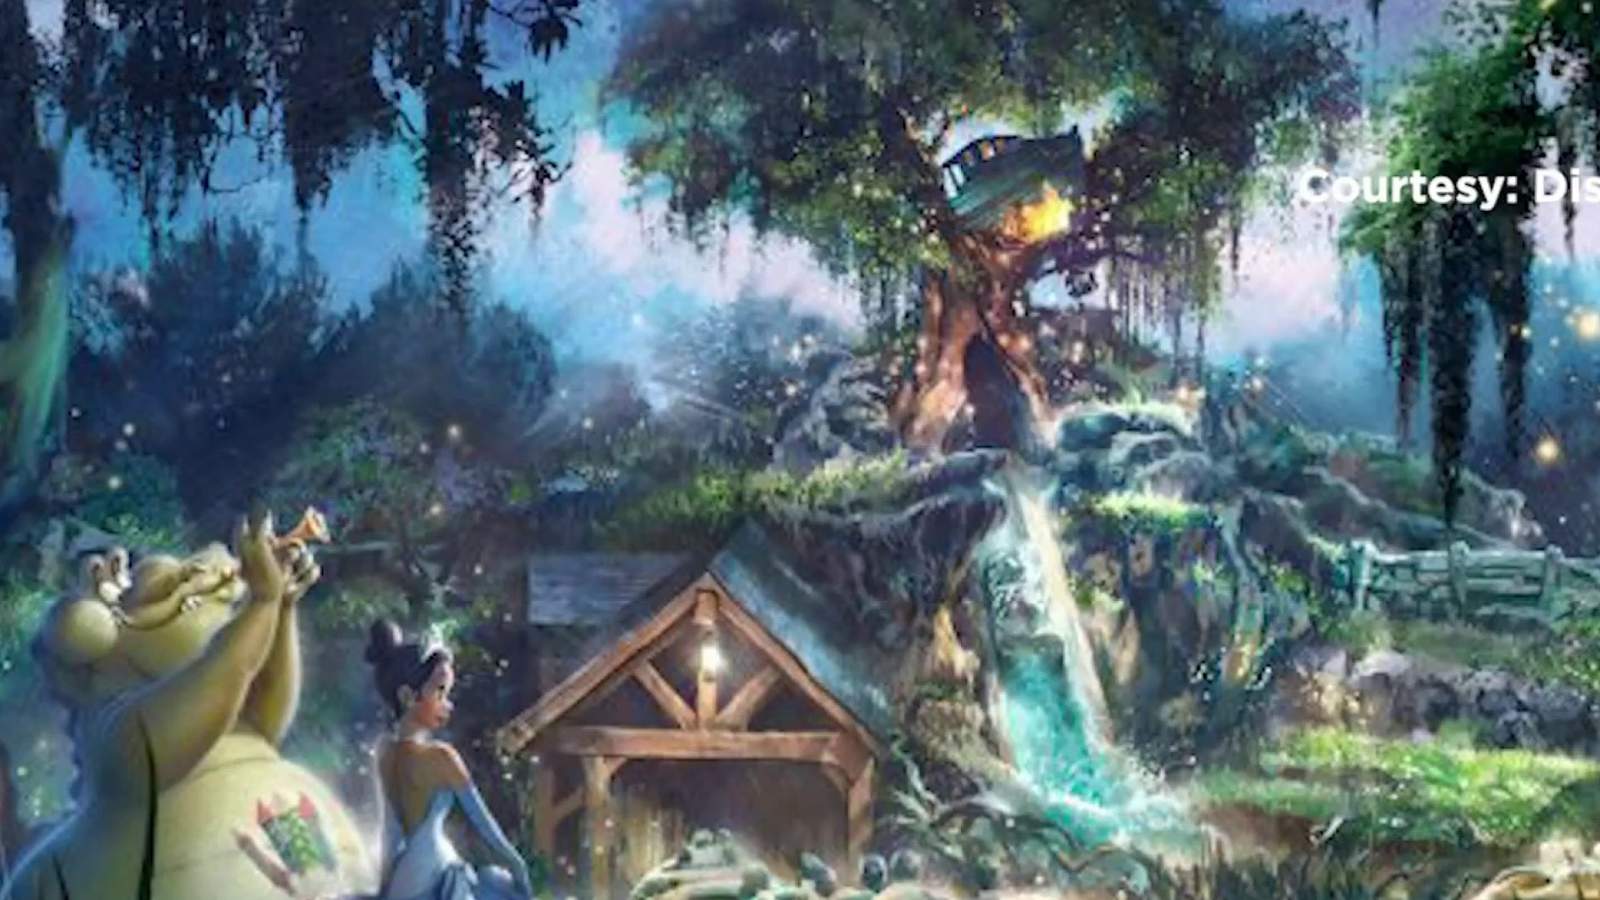 Are you ready? Disney’s Splash Mountain to be re-themed to ‘Princess and the Frog’